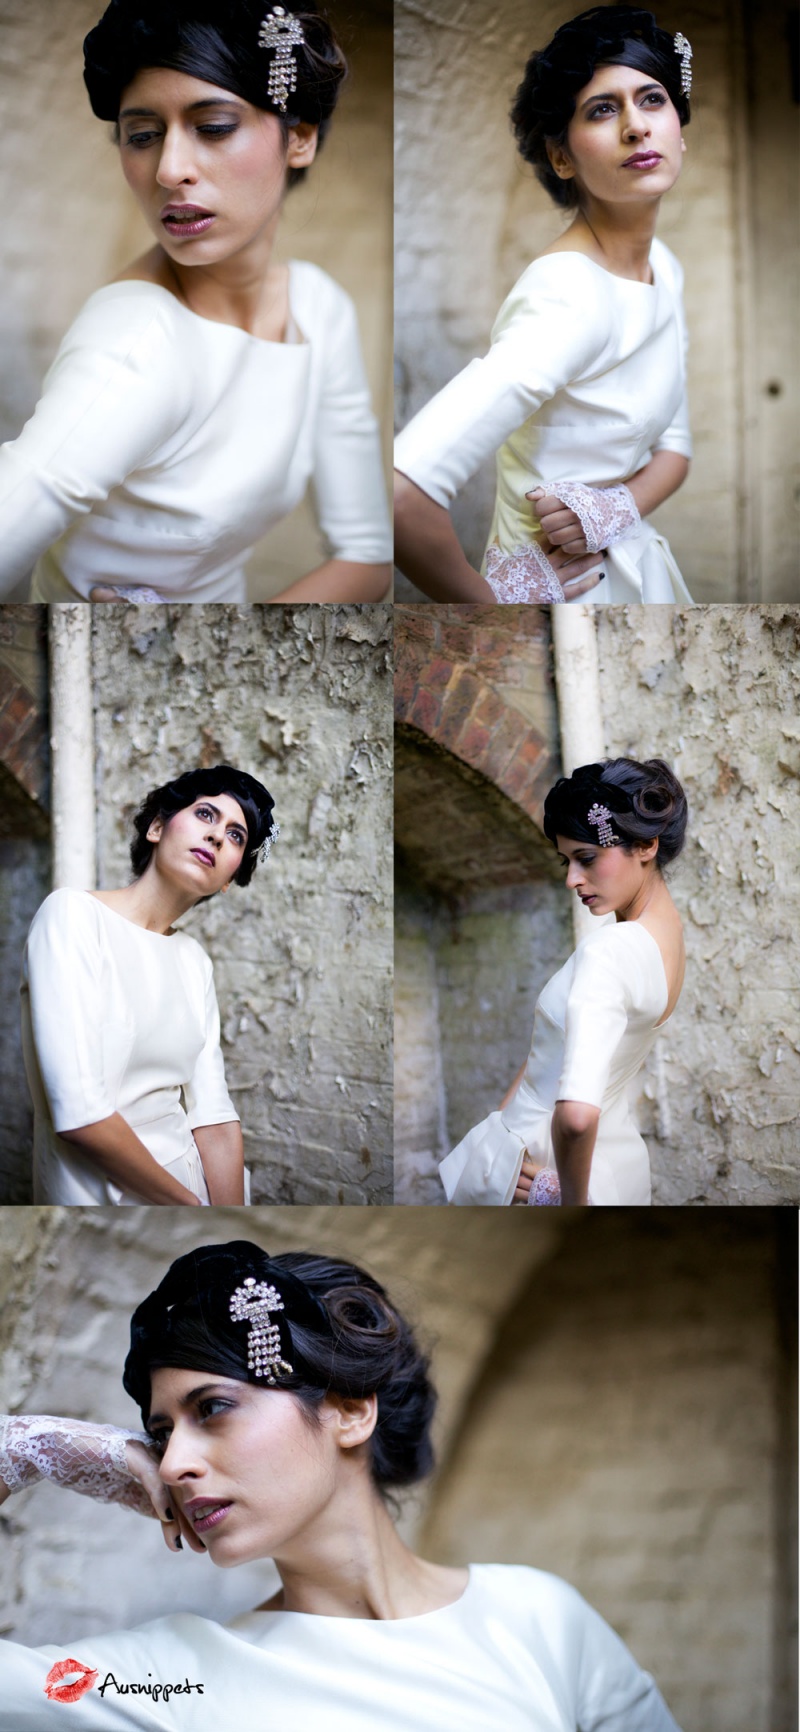 Female model photo shoot of ausnippets and Laurus Goya in london, hair styled by AndreeMarie, wardrobe styled by Kate Anya Barbour, makeup by Mix Max